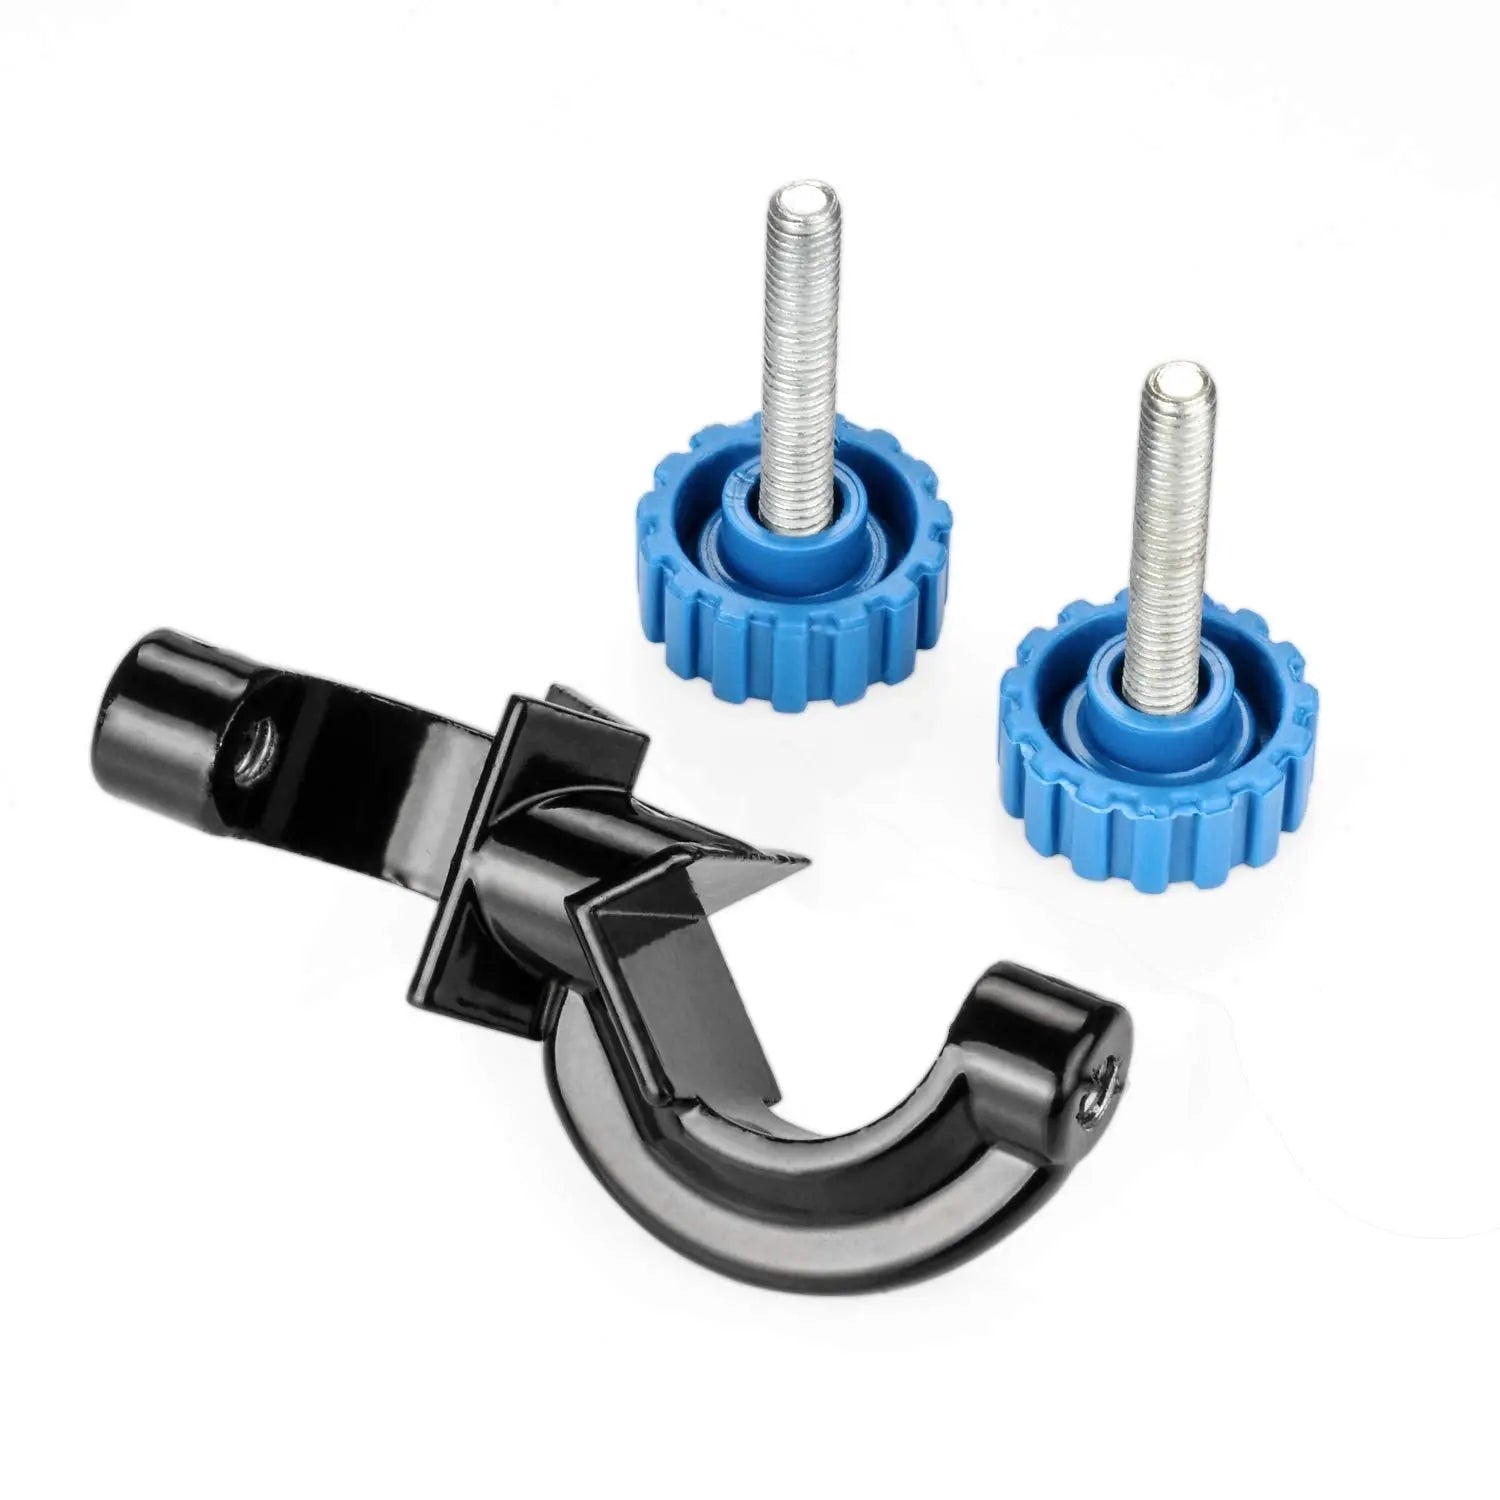 Bosshead Clamp Holder, 2 Pack Clamps